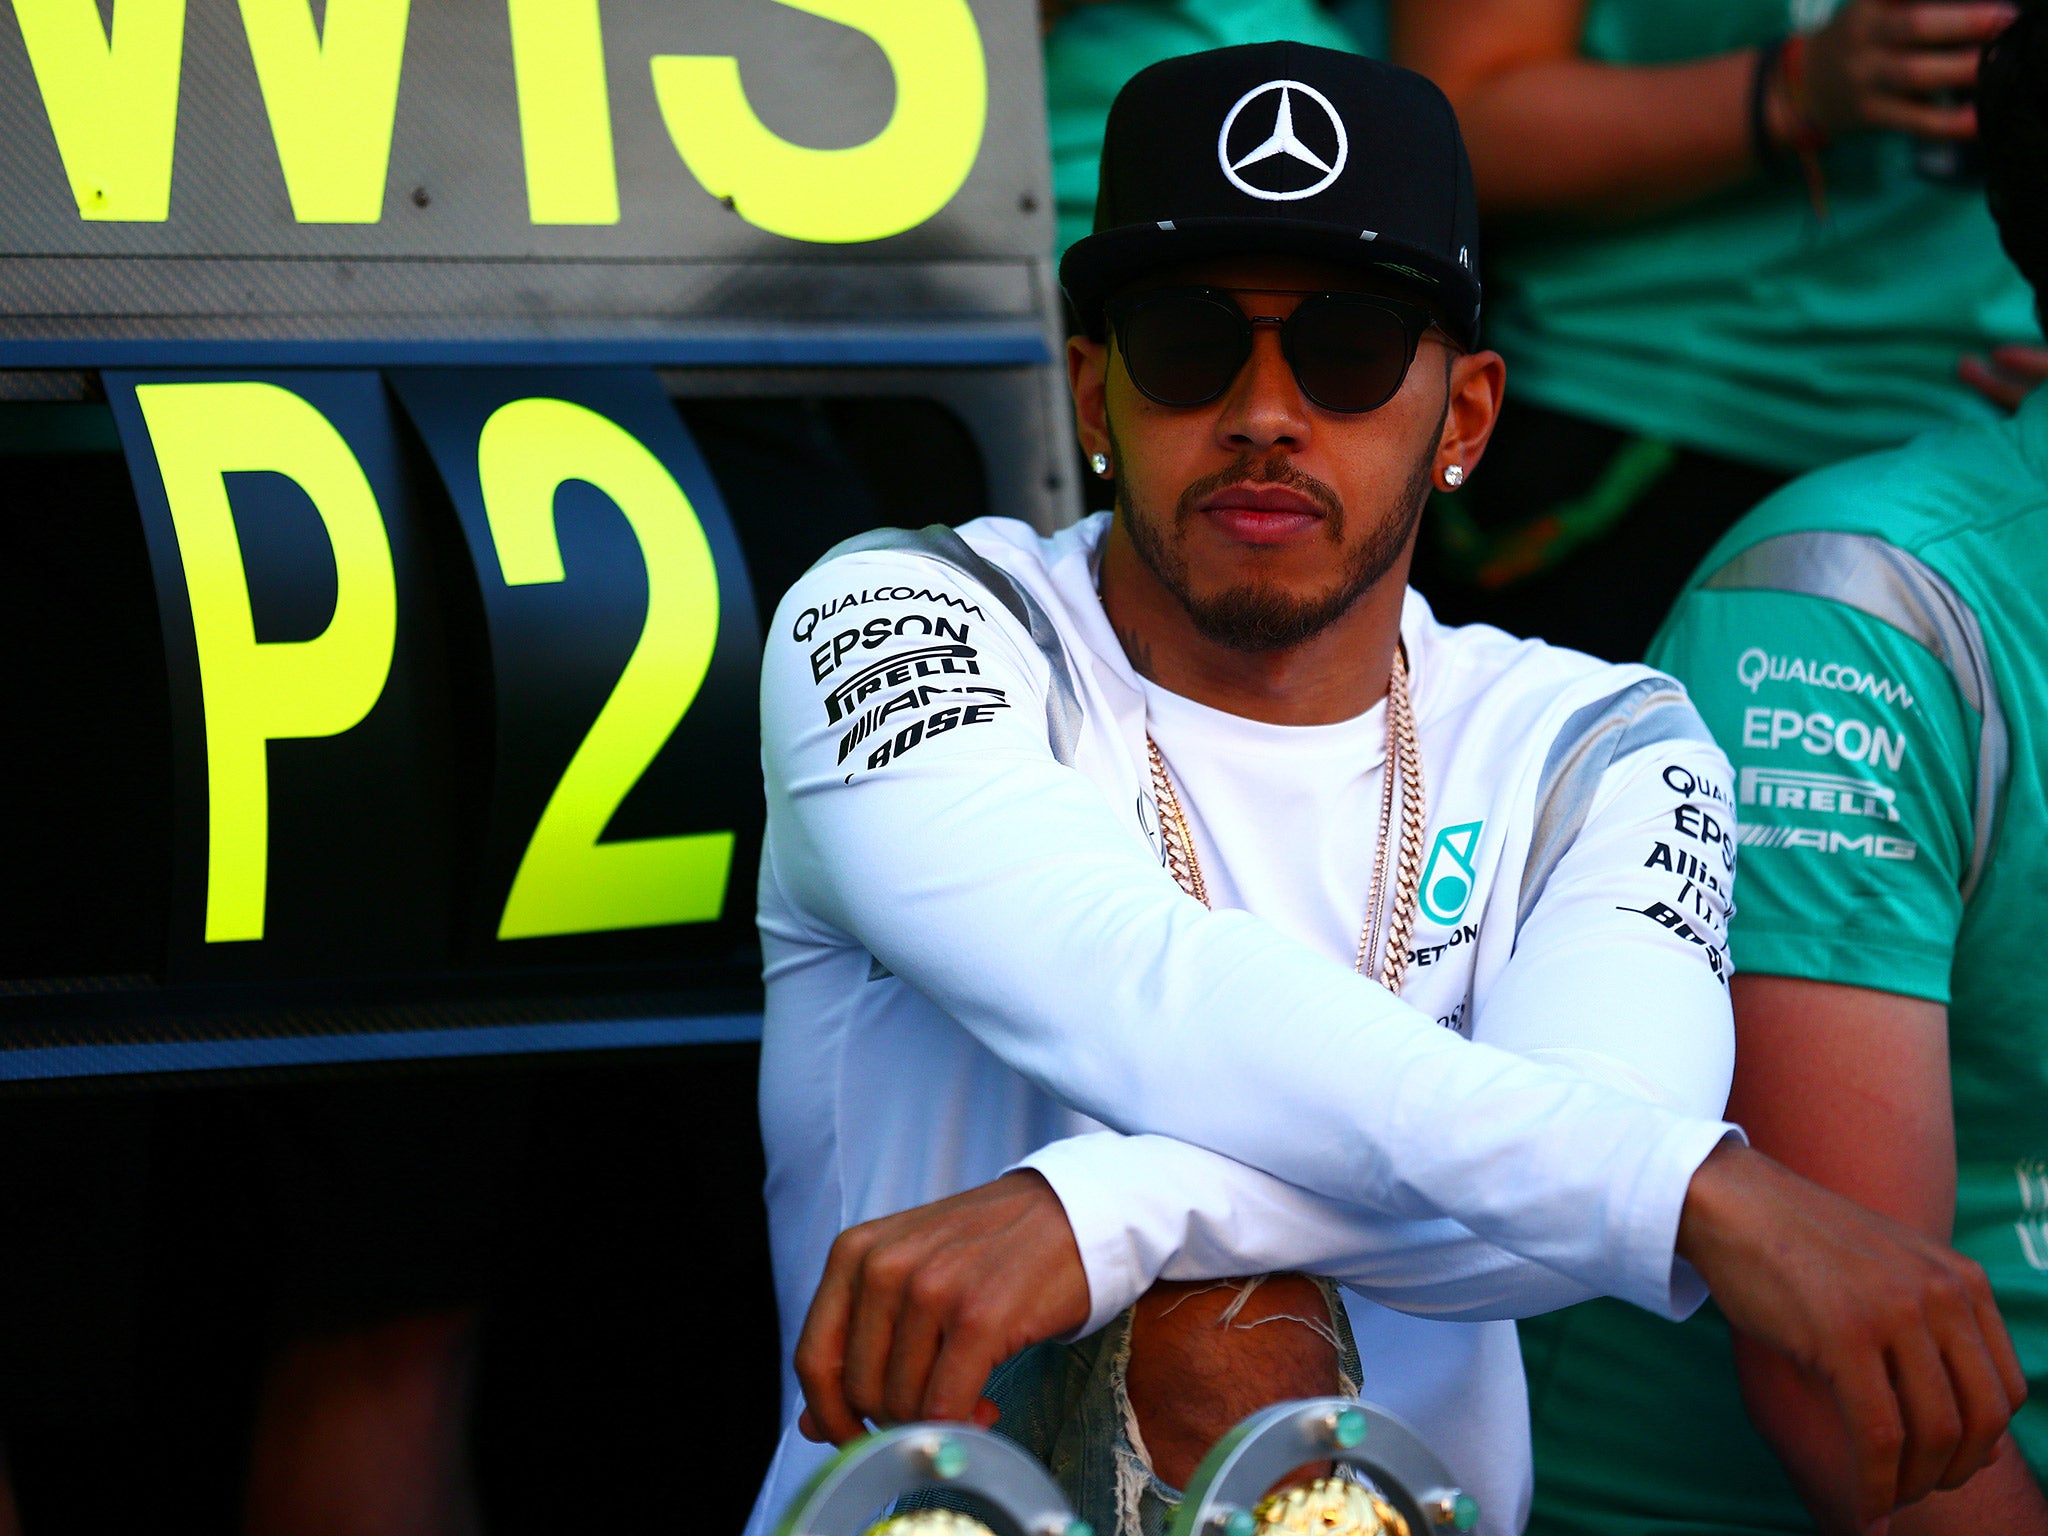 Lewis Hamilton feels the stewards have been harsh with their penalties this season